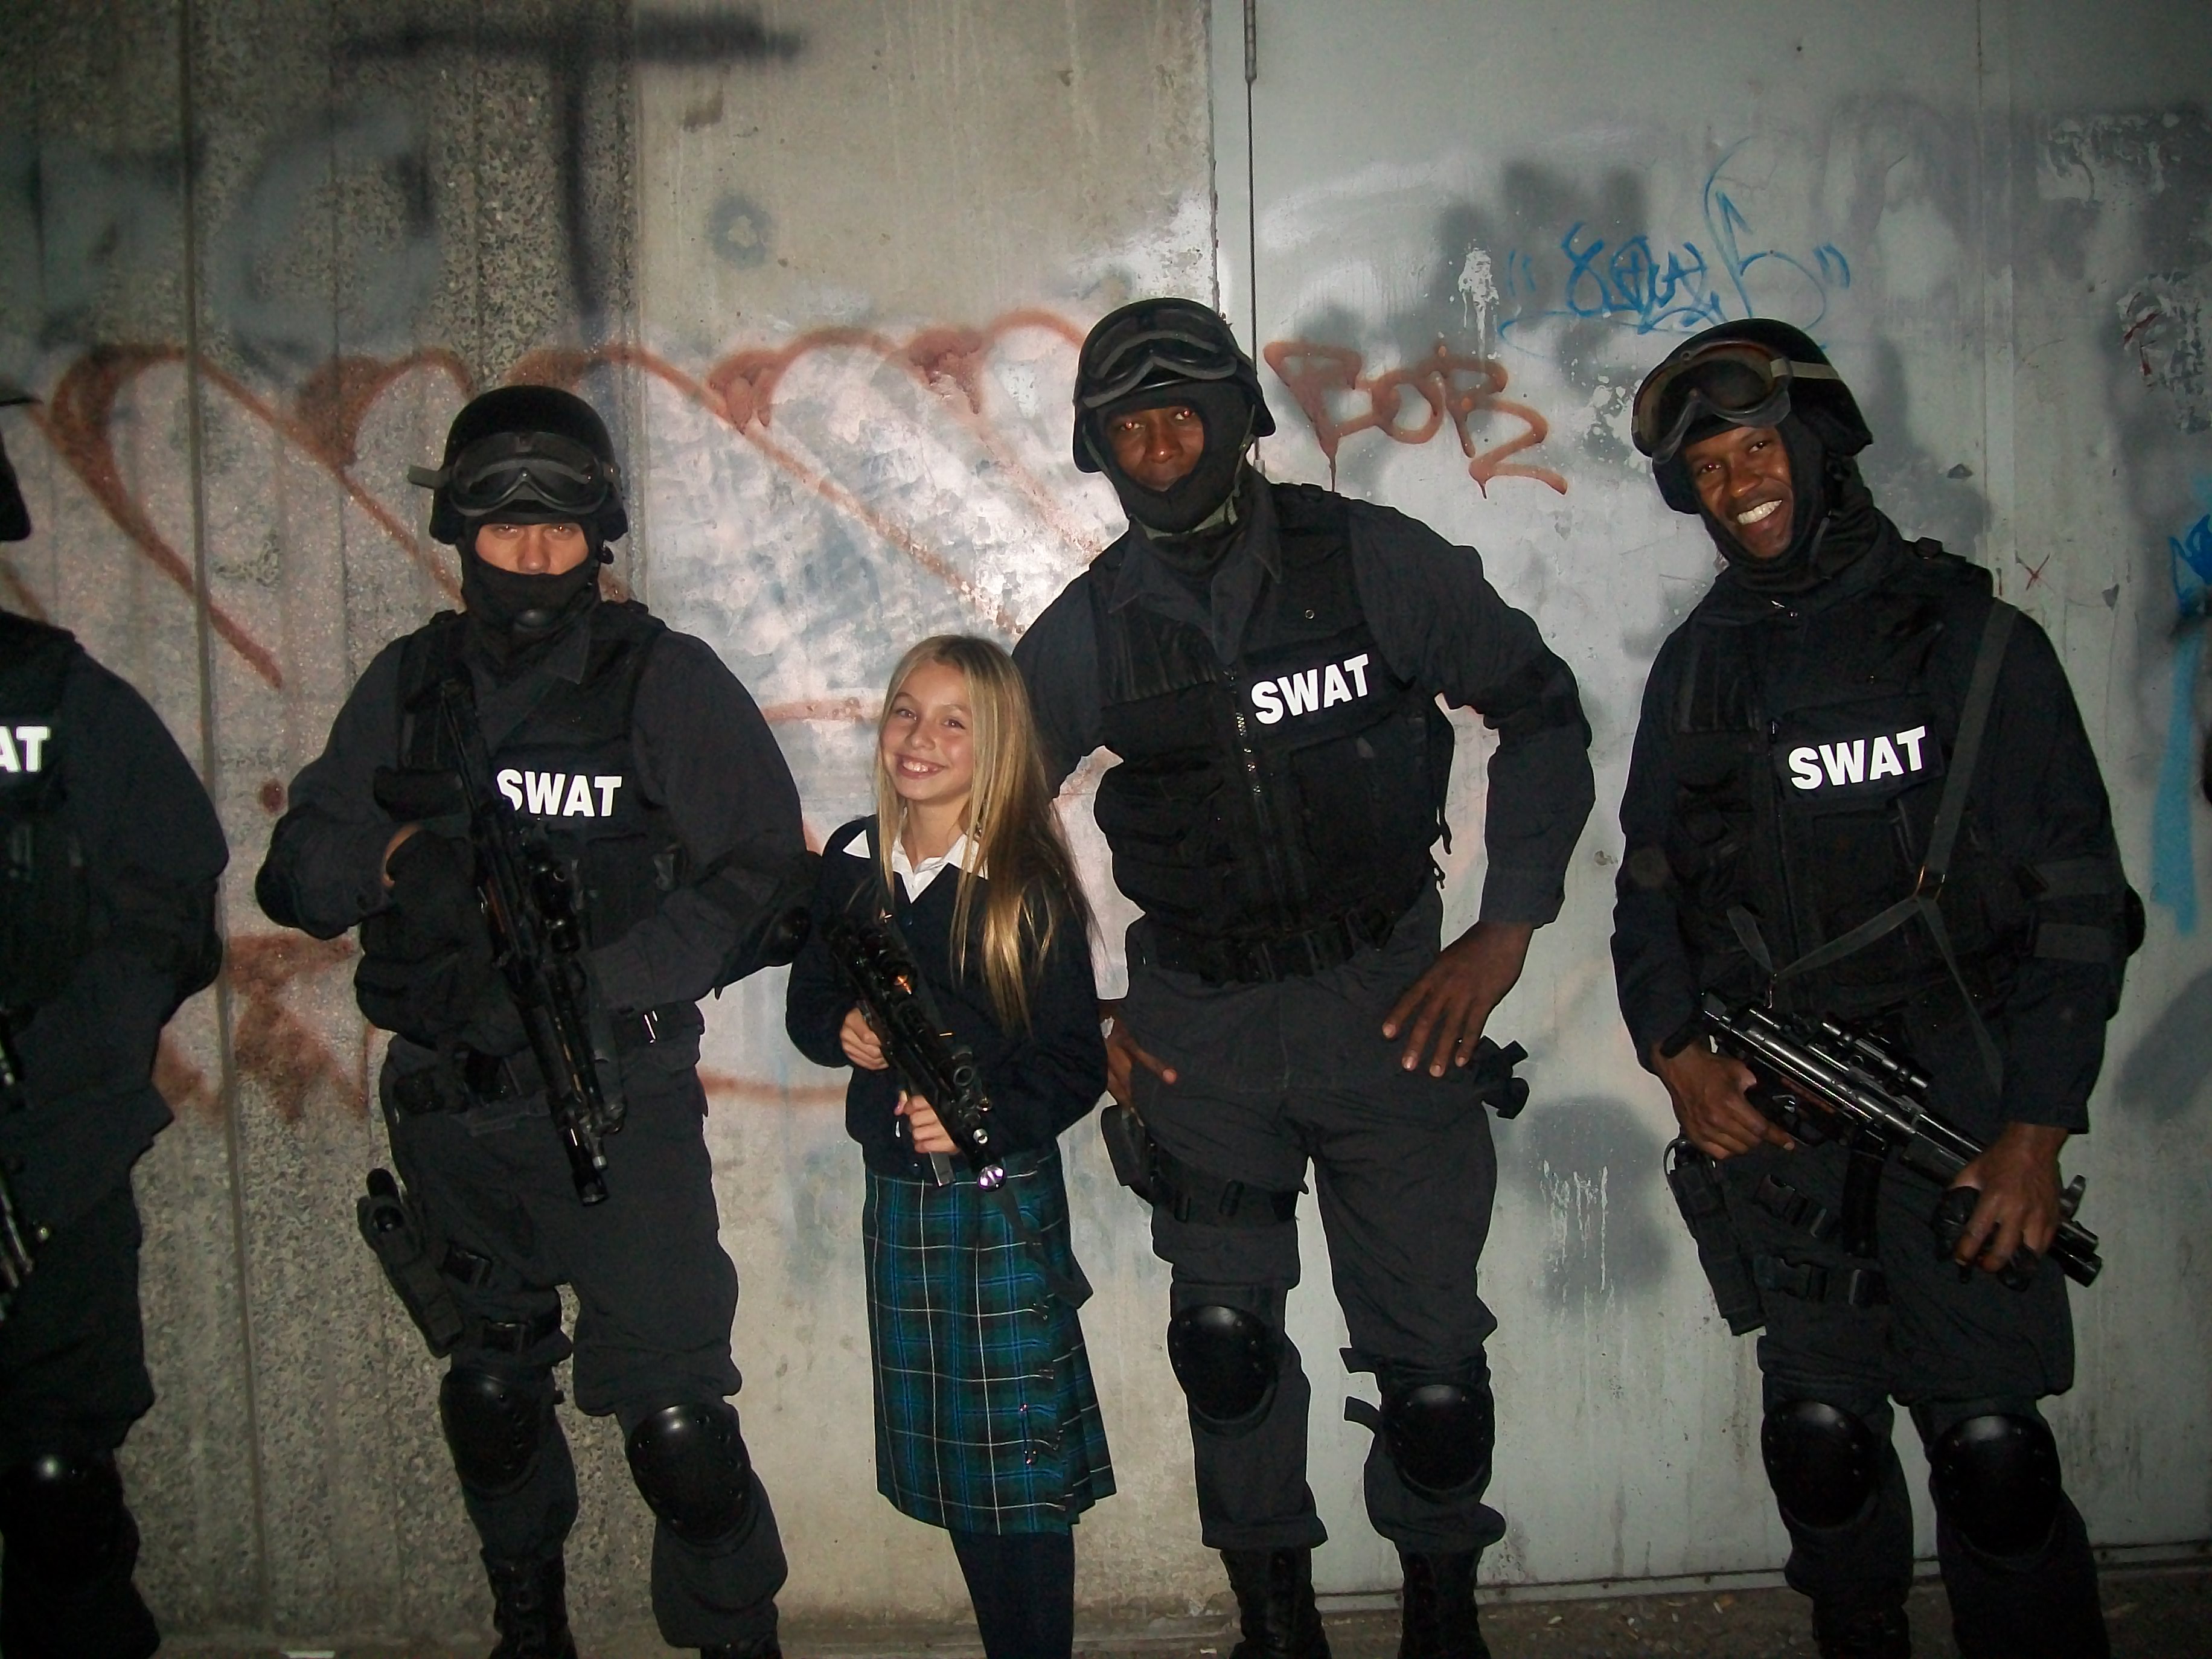 Samantha Page on set with swat team.